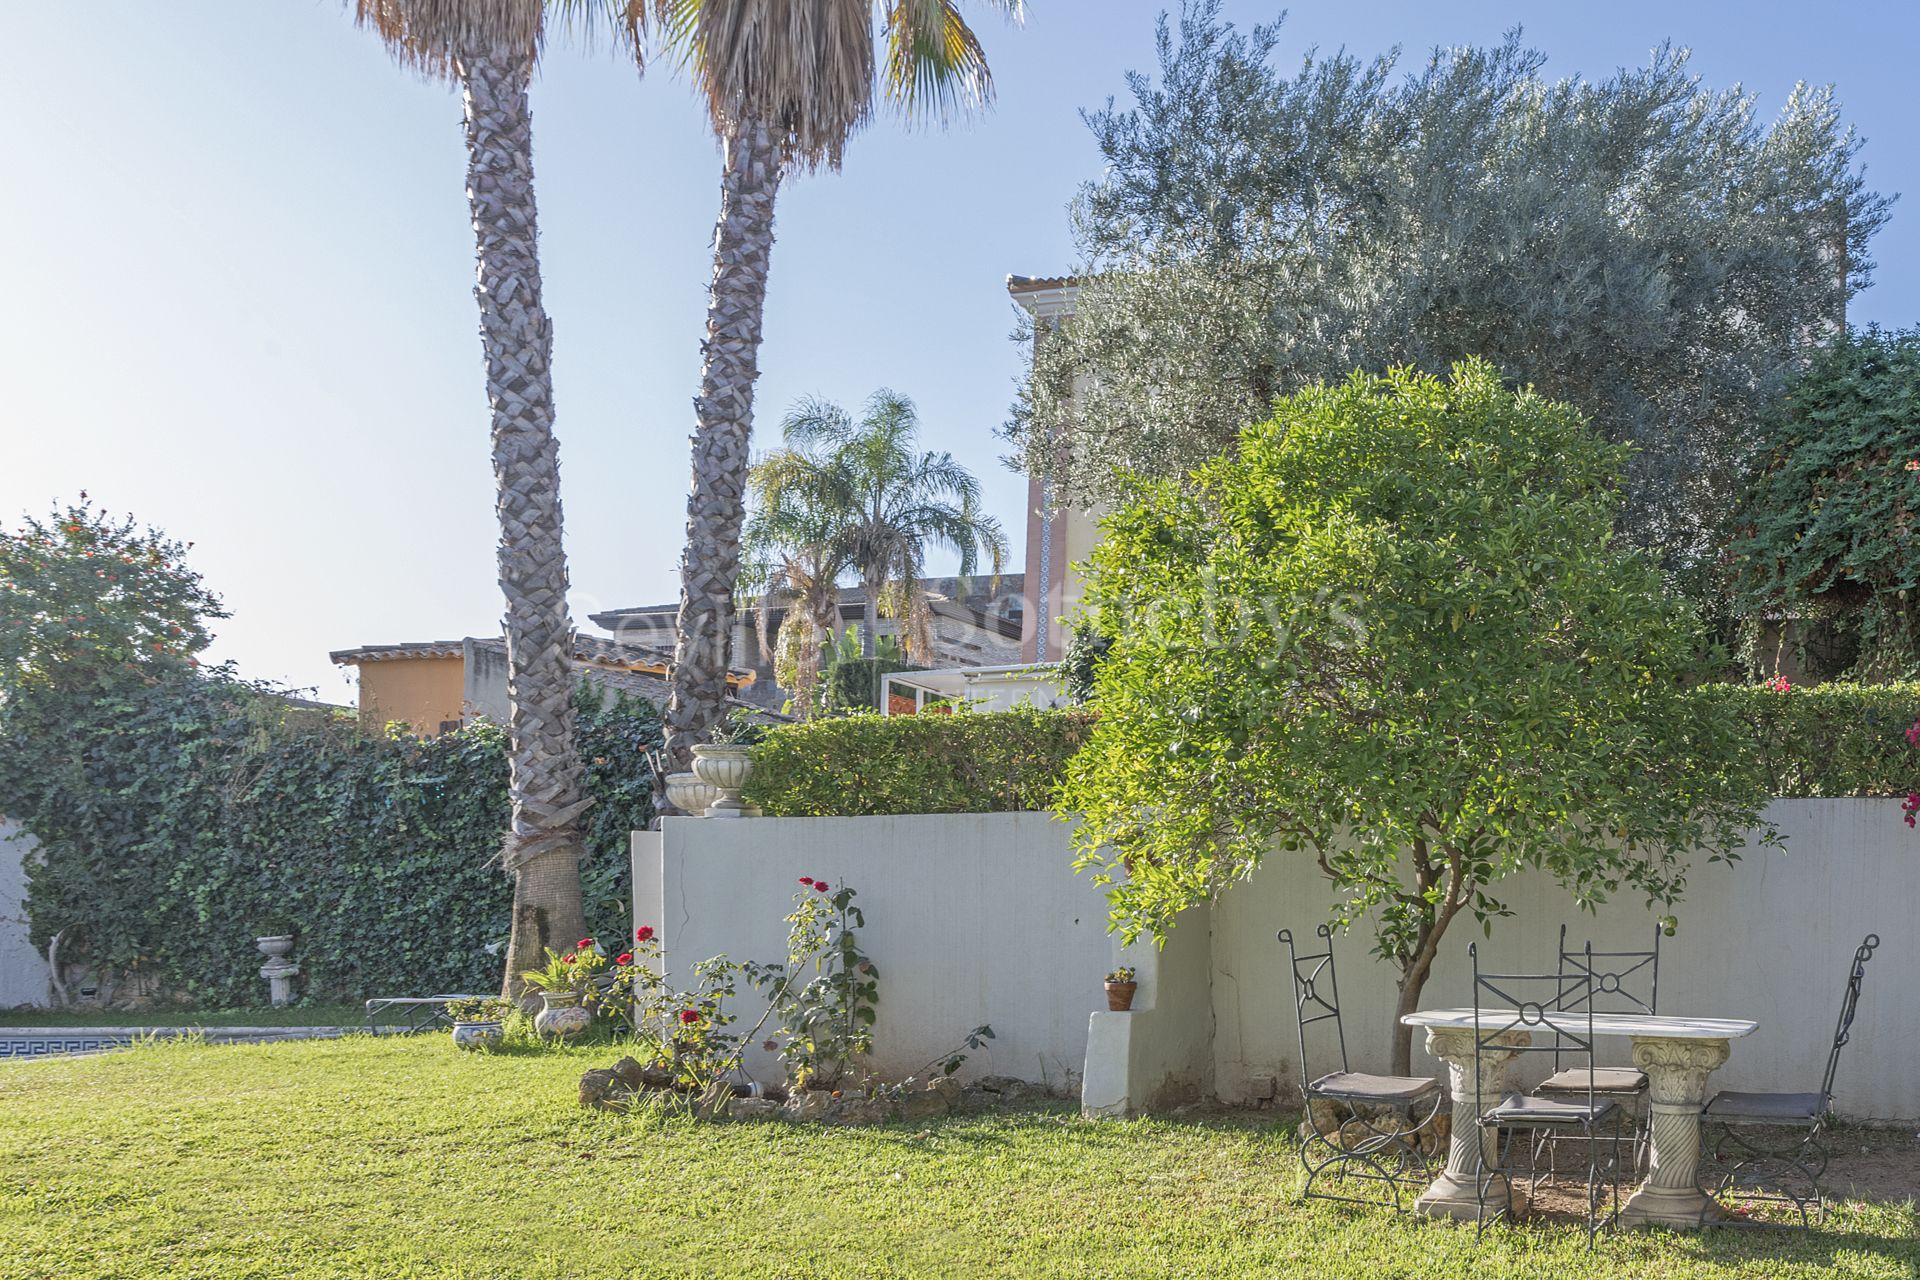 Detached villa with pool and large plot in the residential area of Los Cerros de Montequinto.